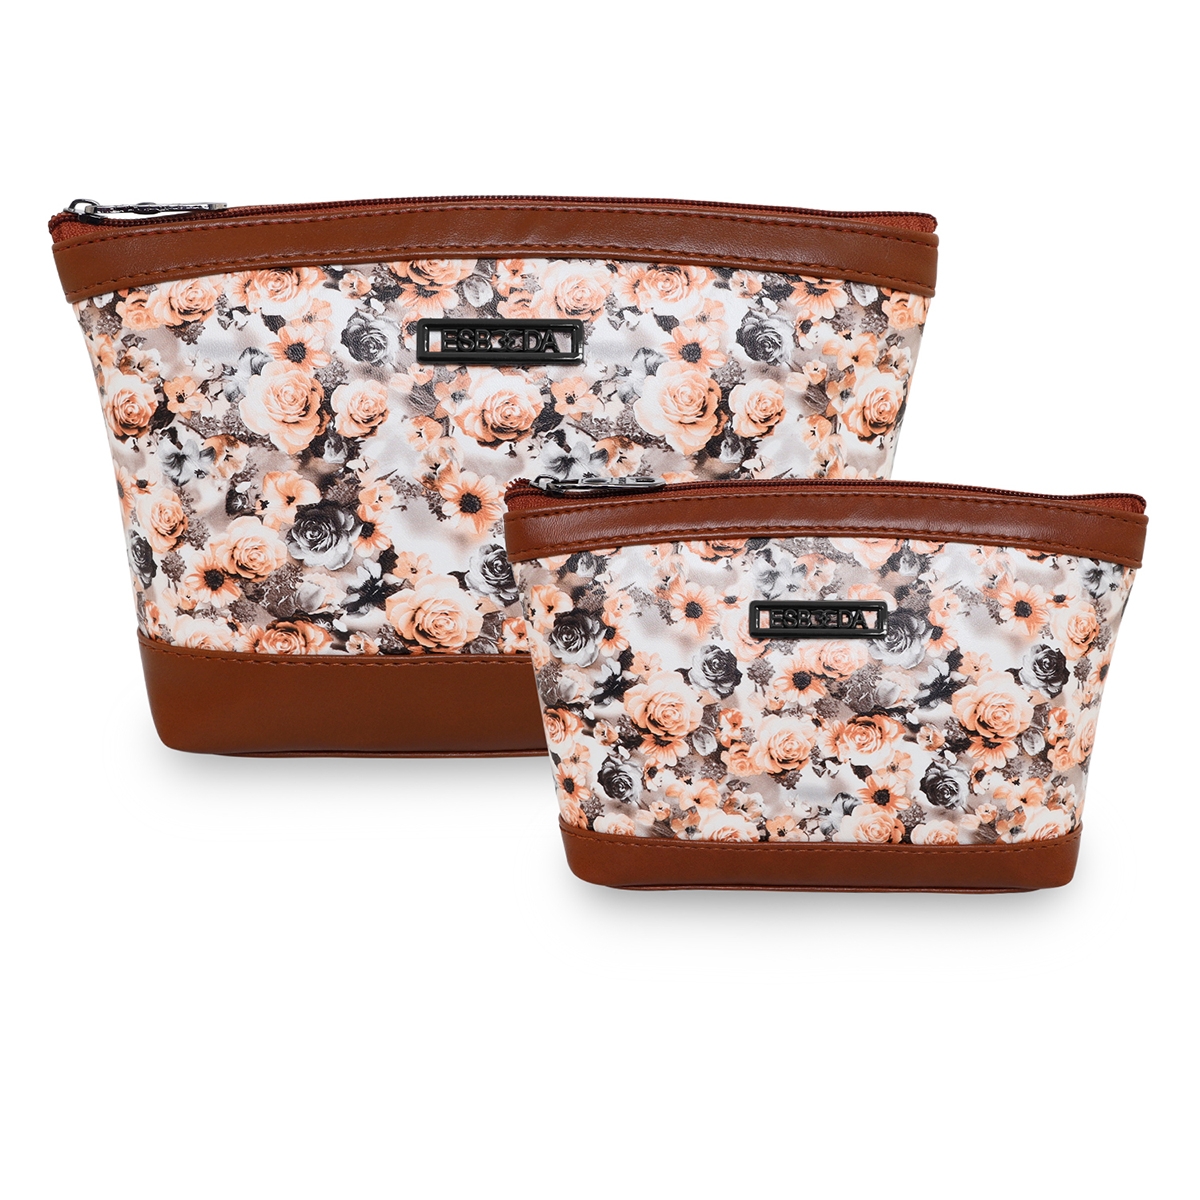 ESBEDA | ESBEDA Tan Color Floral Print Pouch For Women Pack of 2